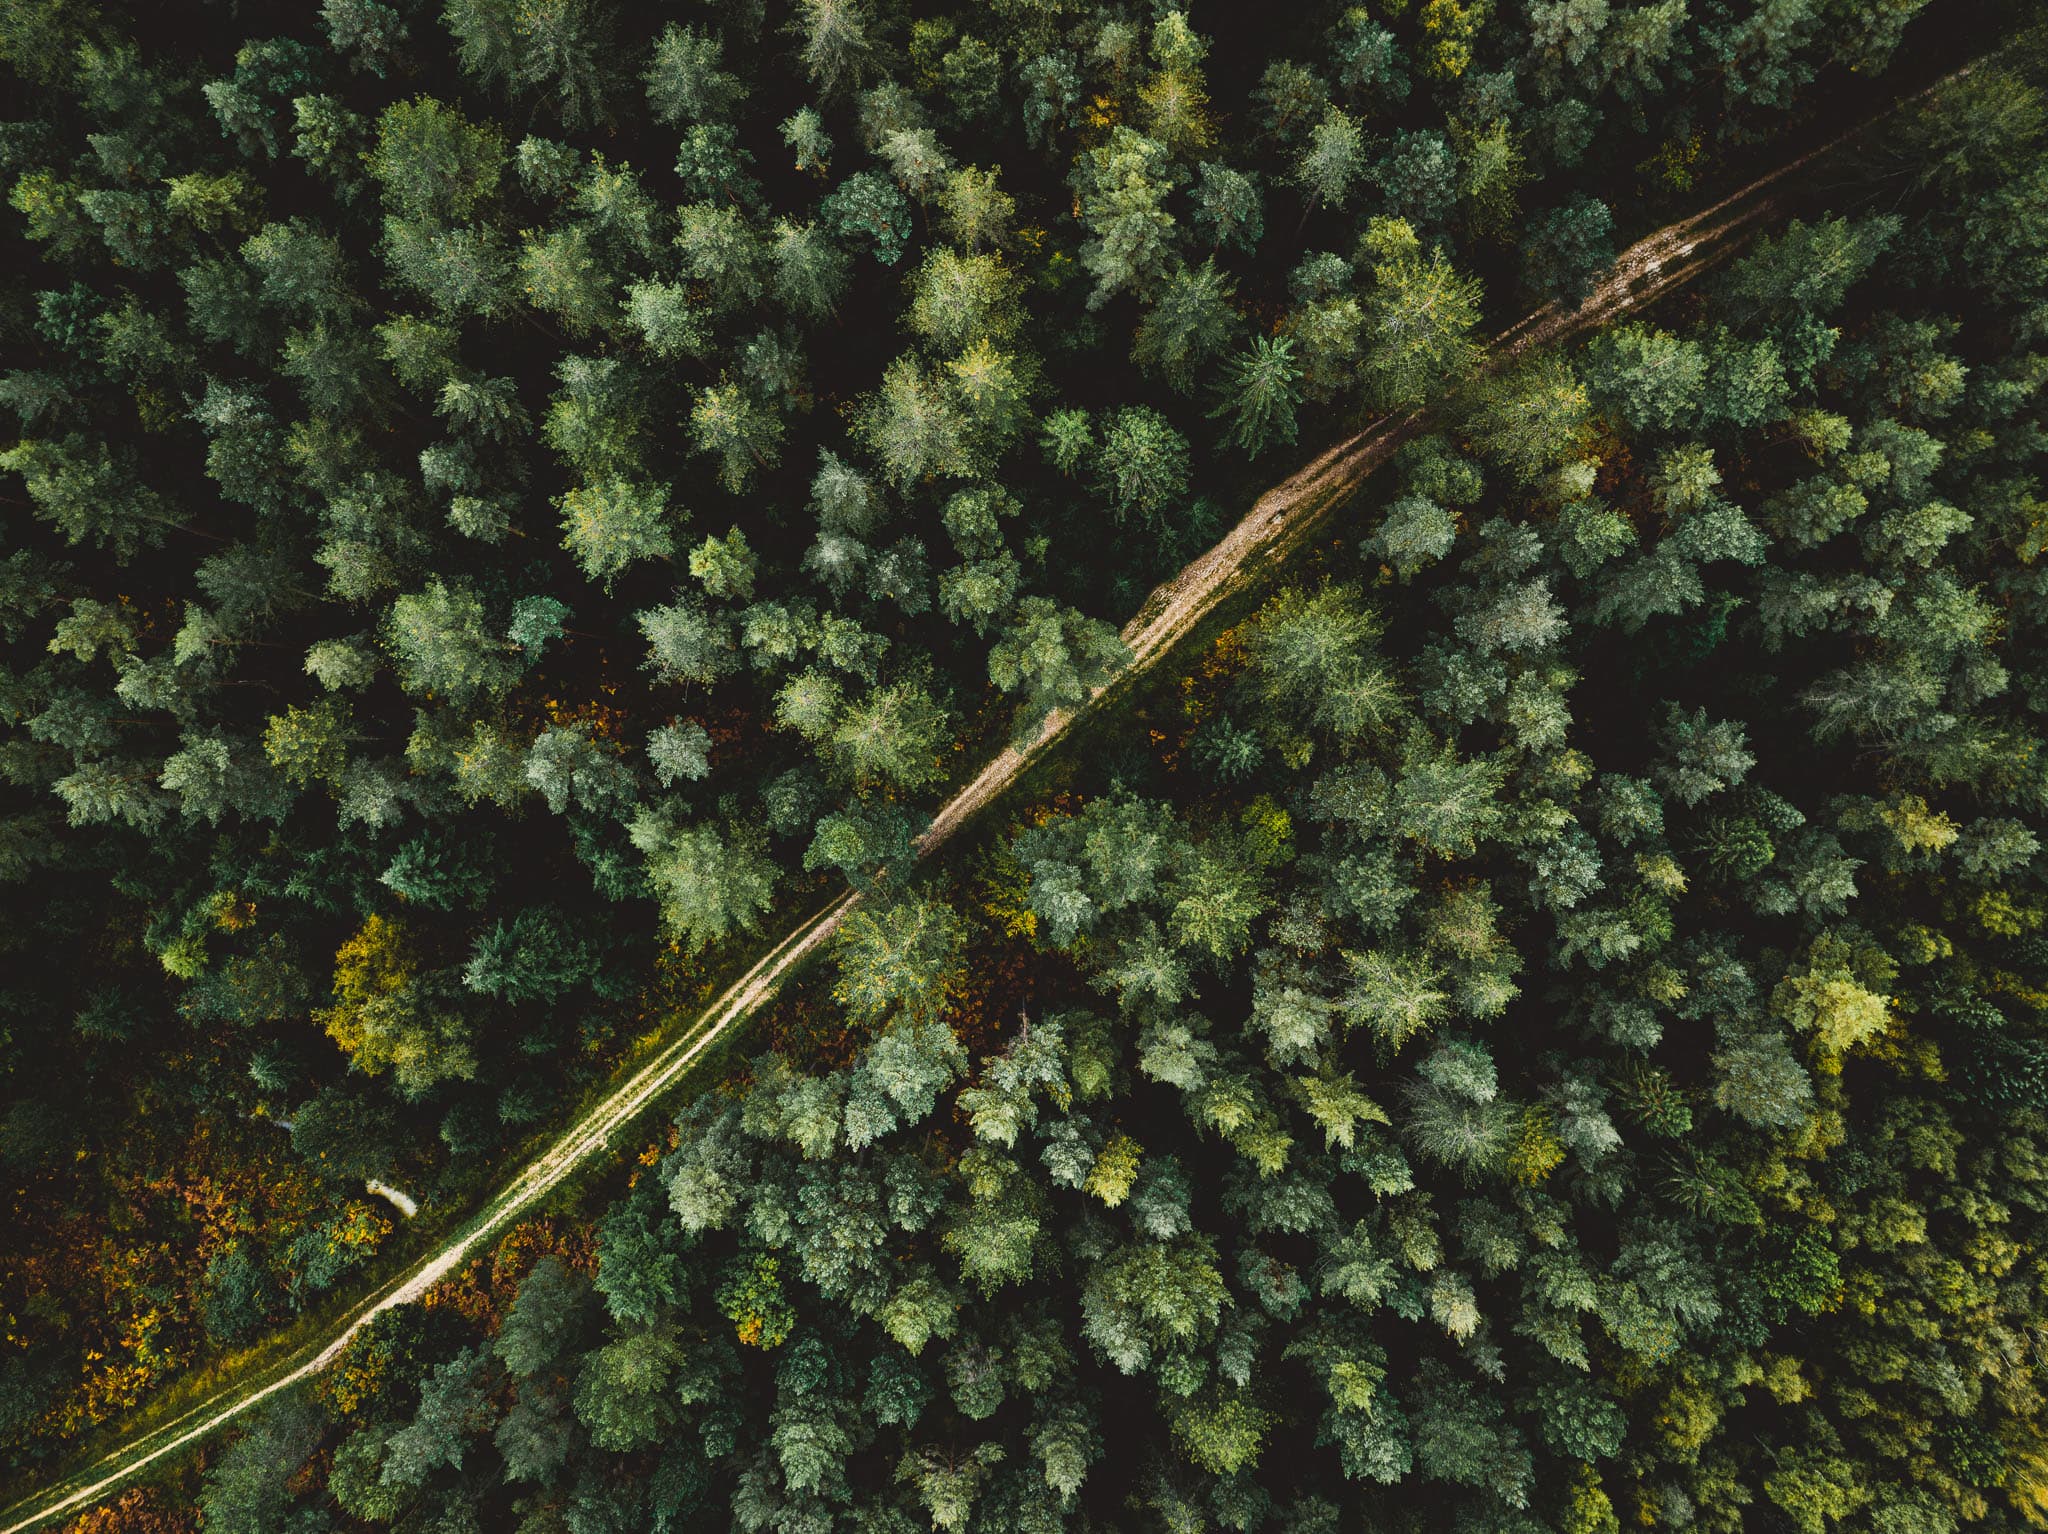 Top down aerial photo of a pine wood in autumn cut diagonally by a bridleway